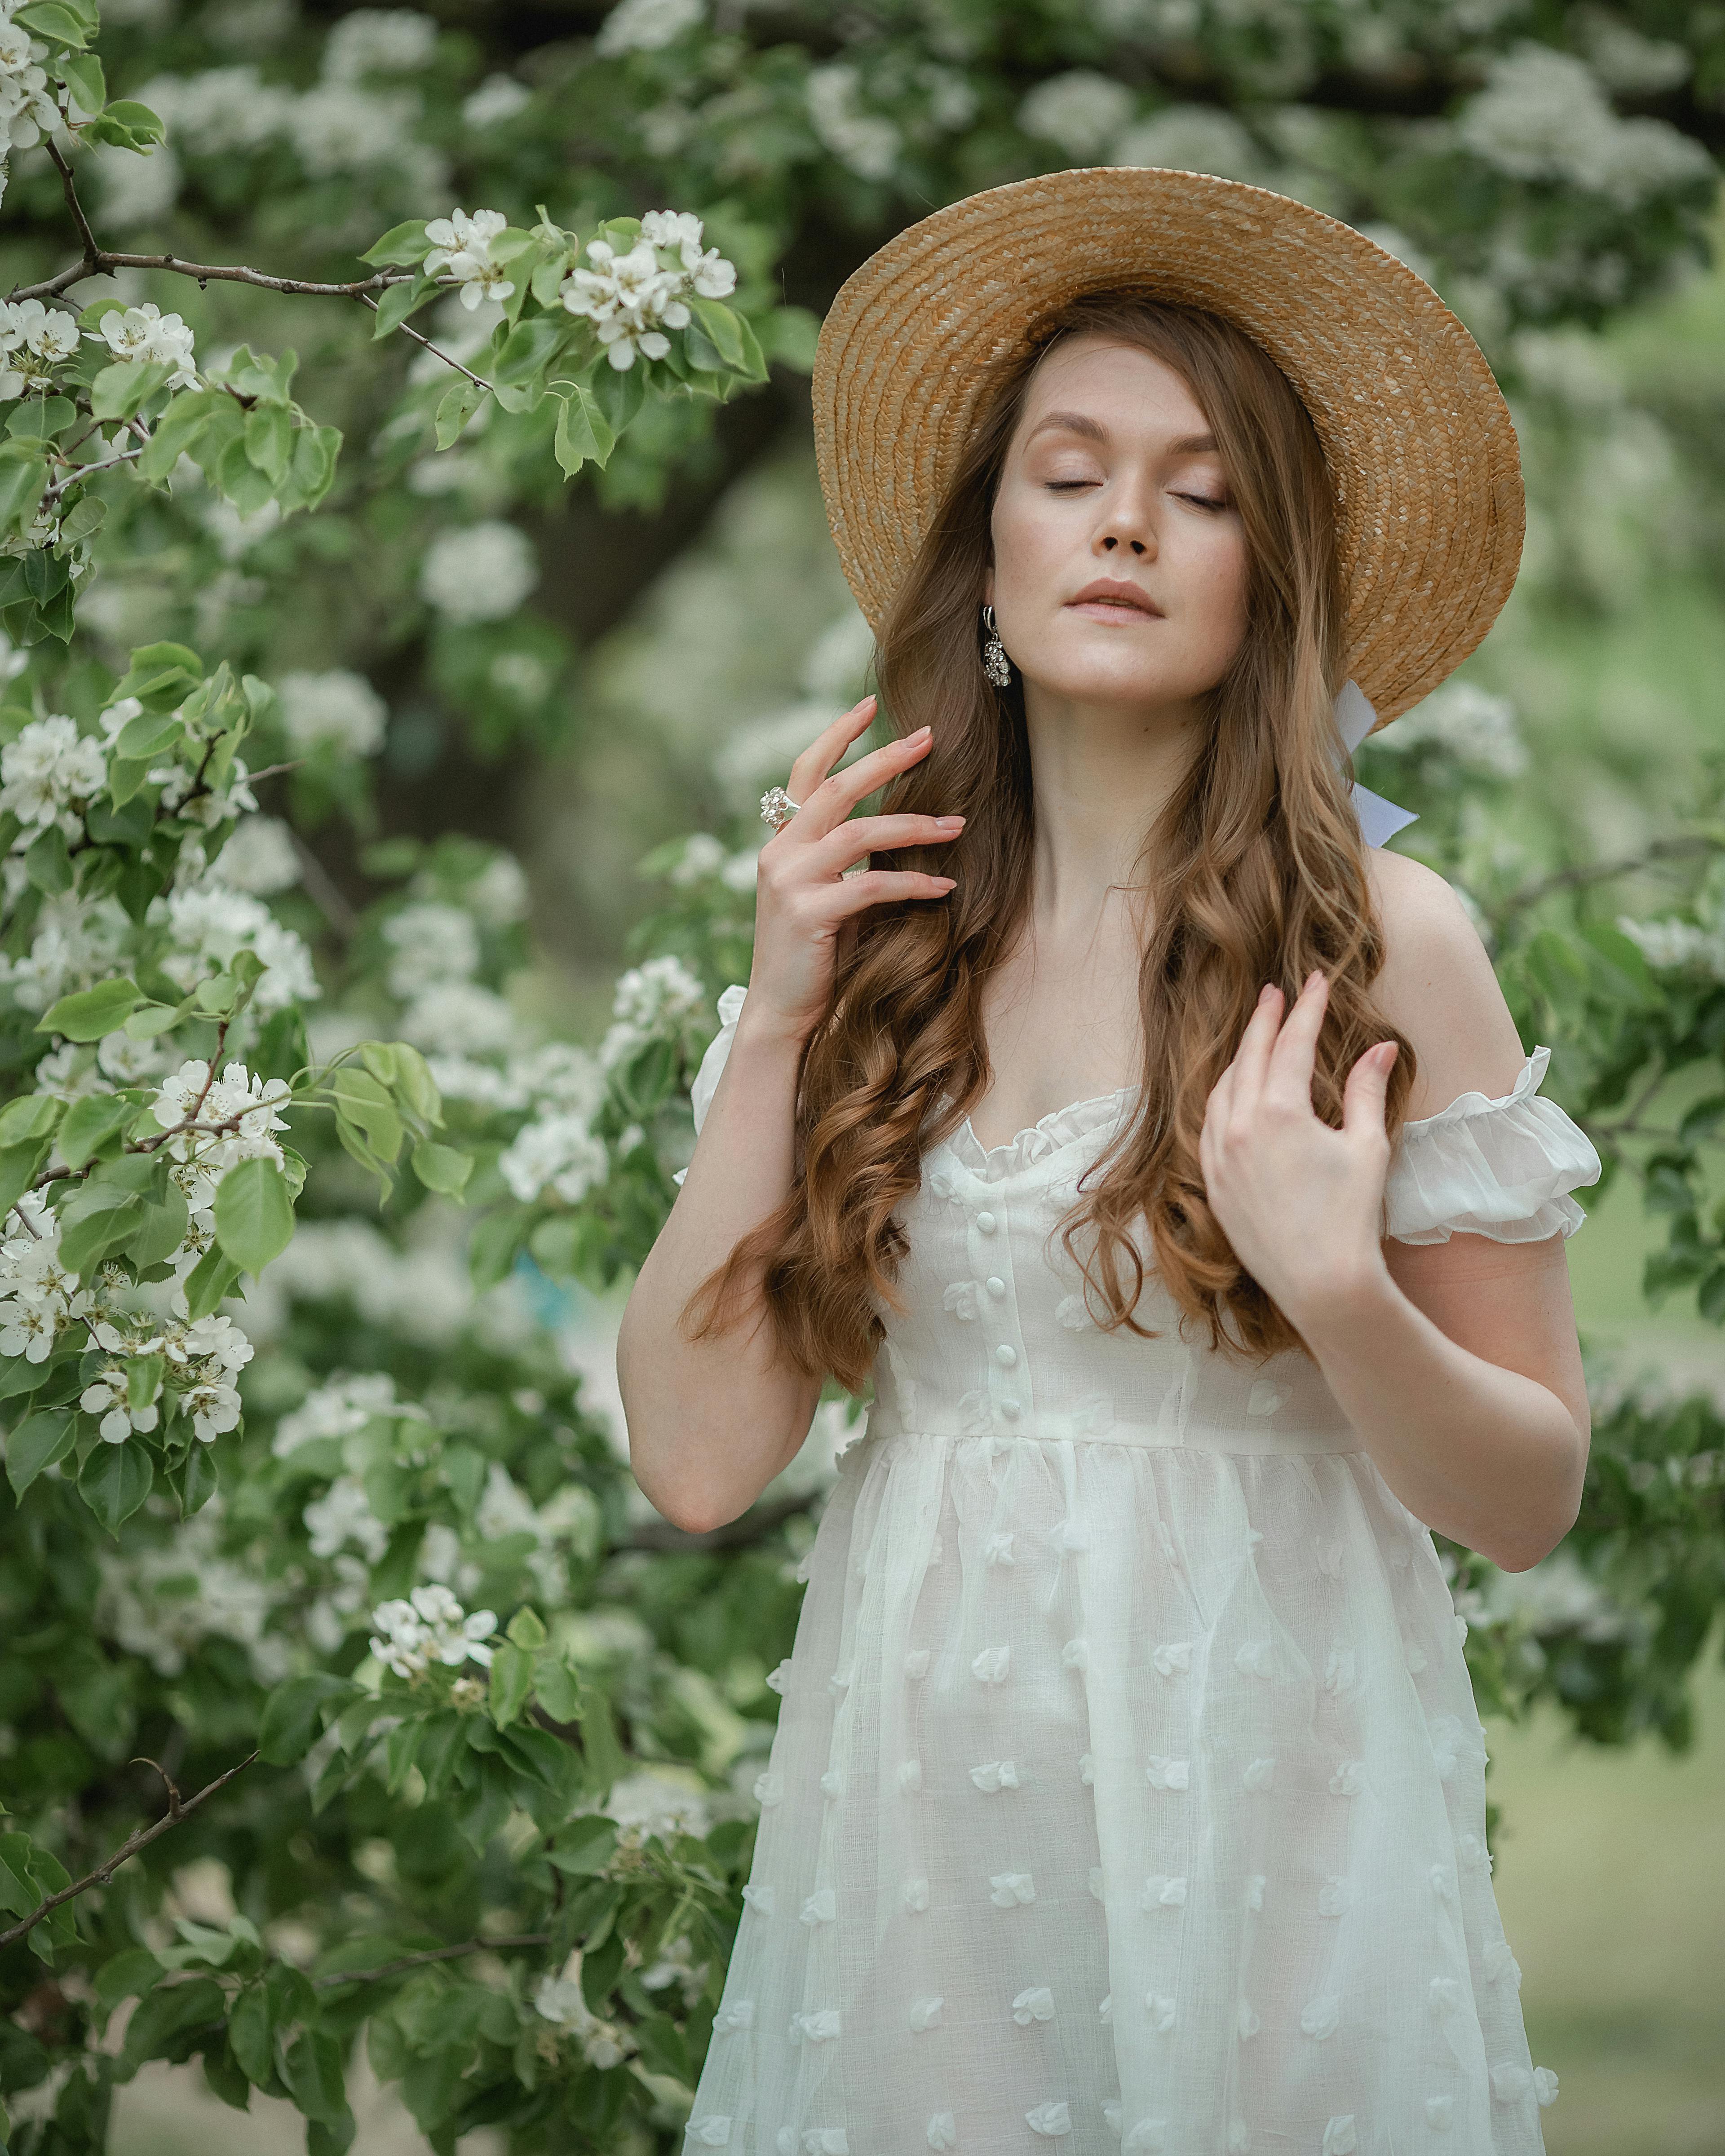 Woman with Eyes Closed in Dress near River · Free Stock Photo